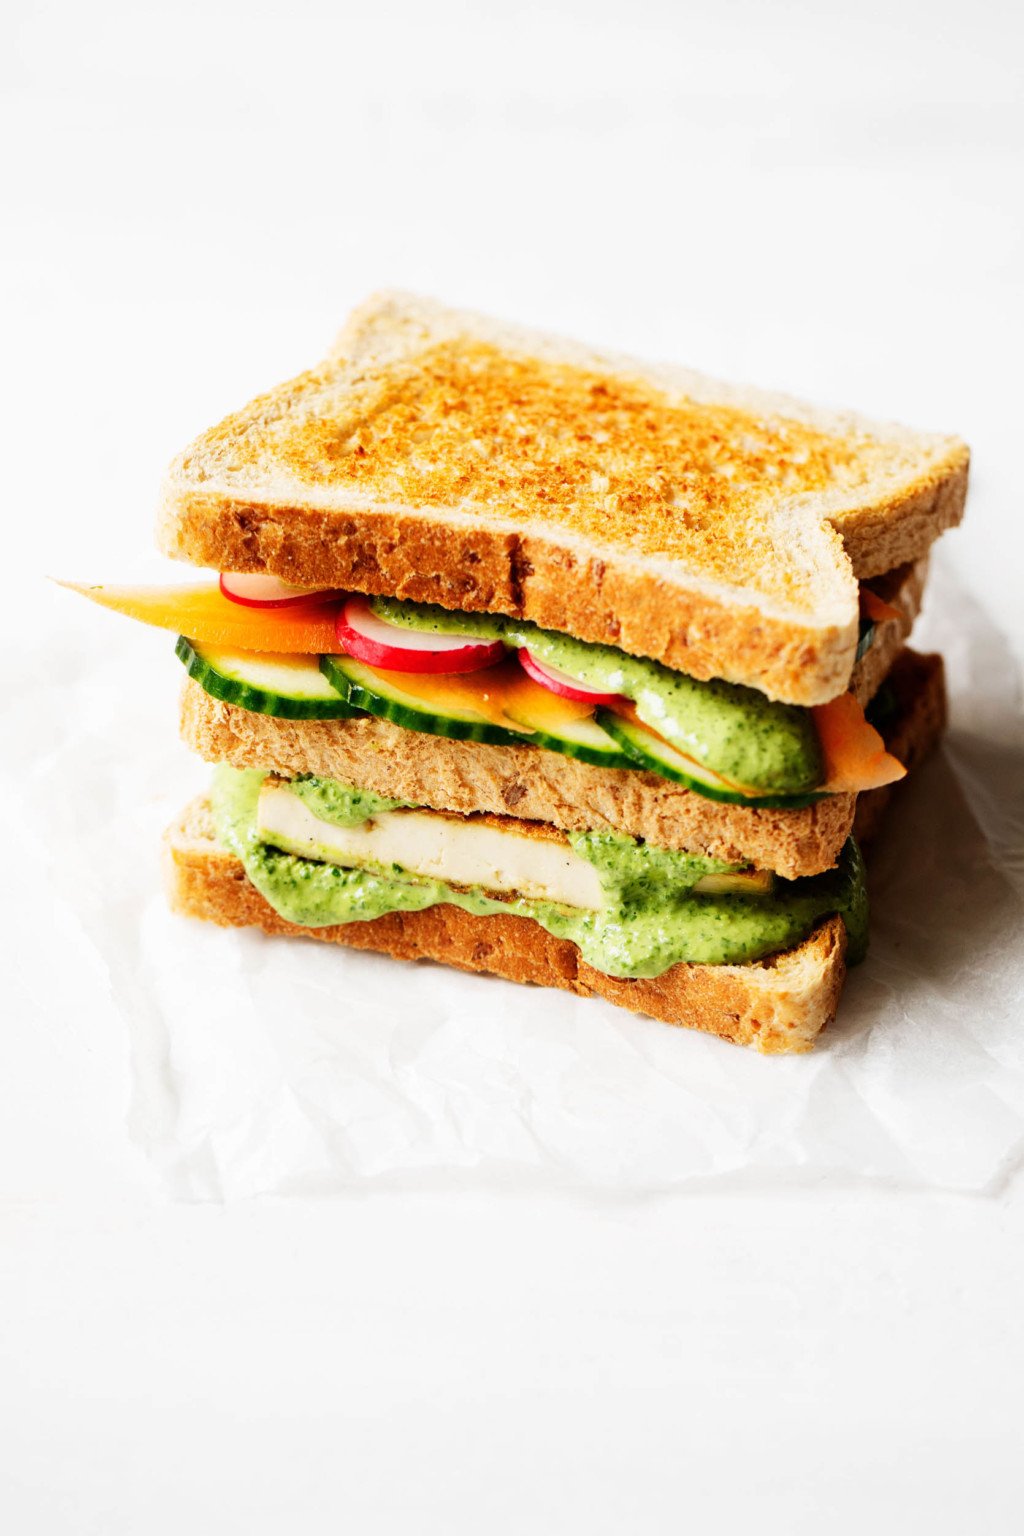 A colorful, three layered vegan green goddess sandwich is placed on a small piece of parchment paper, waiting to be cut in half.